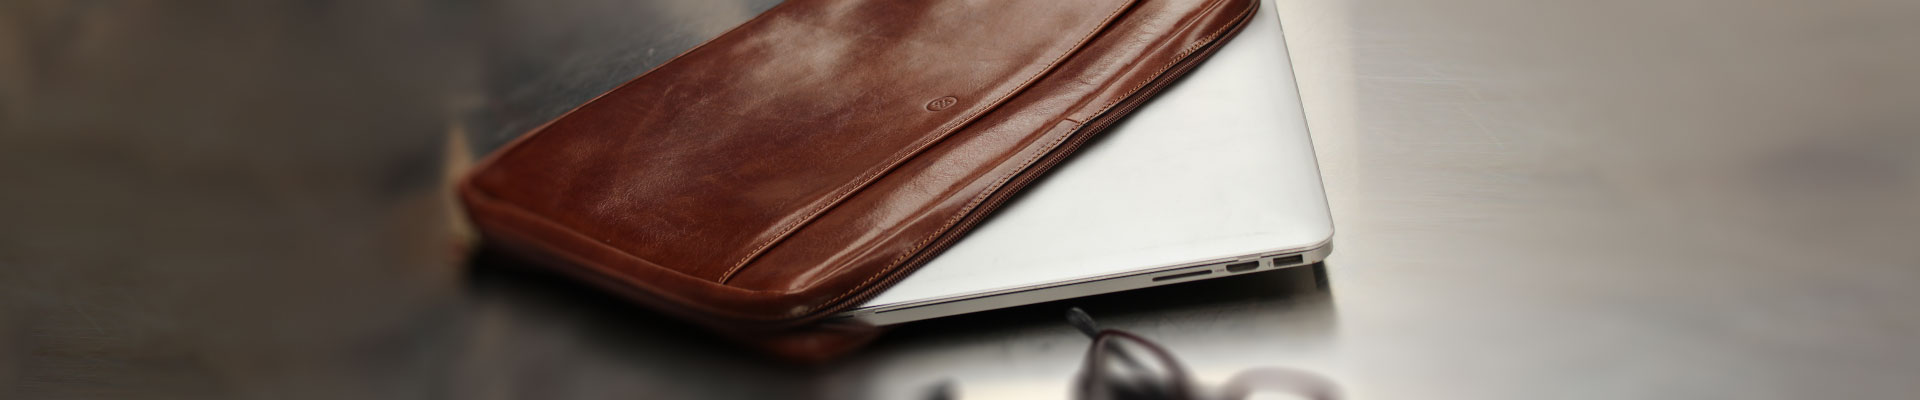 Leather Laptop Cases and Sleeves